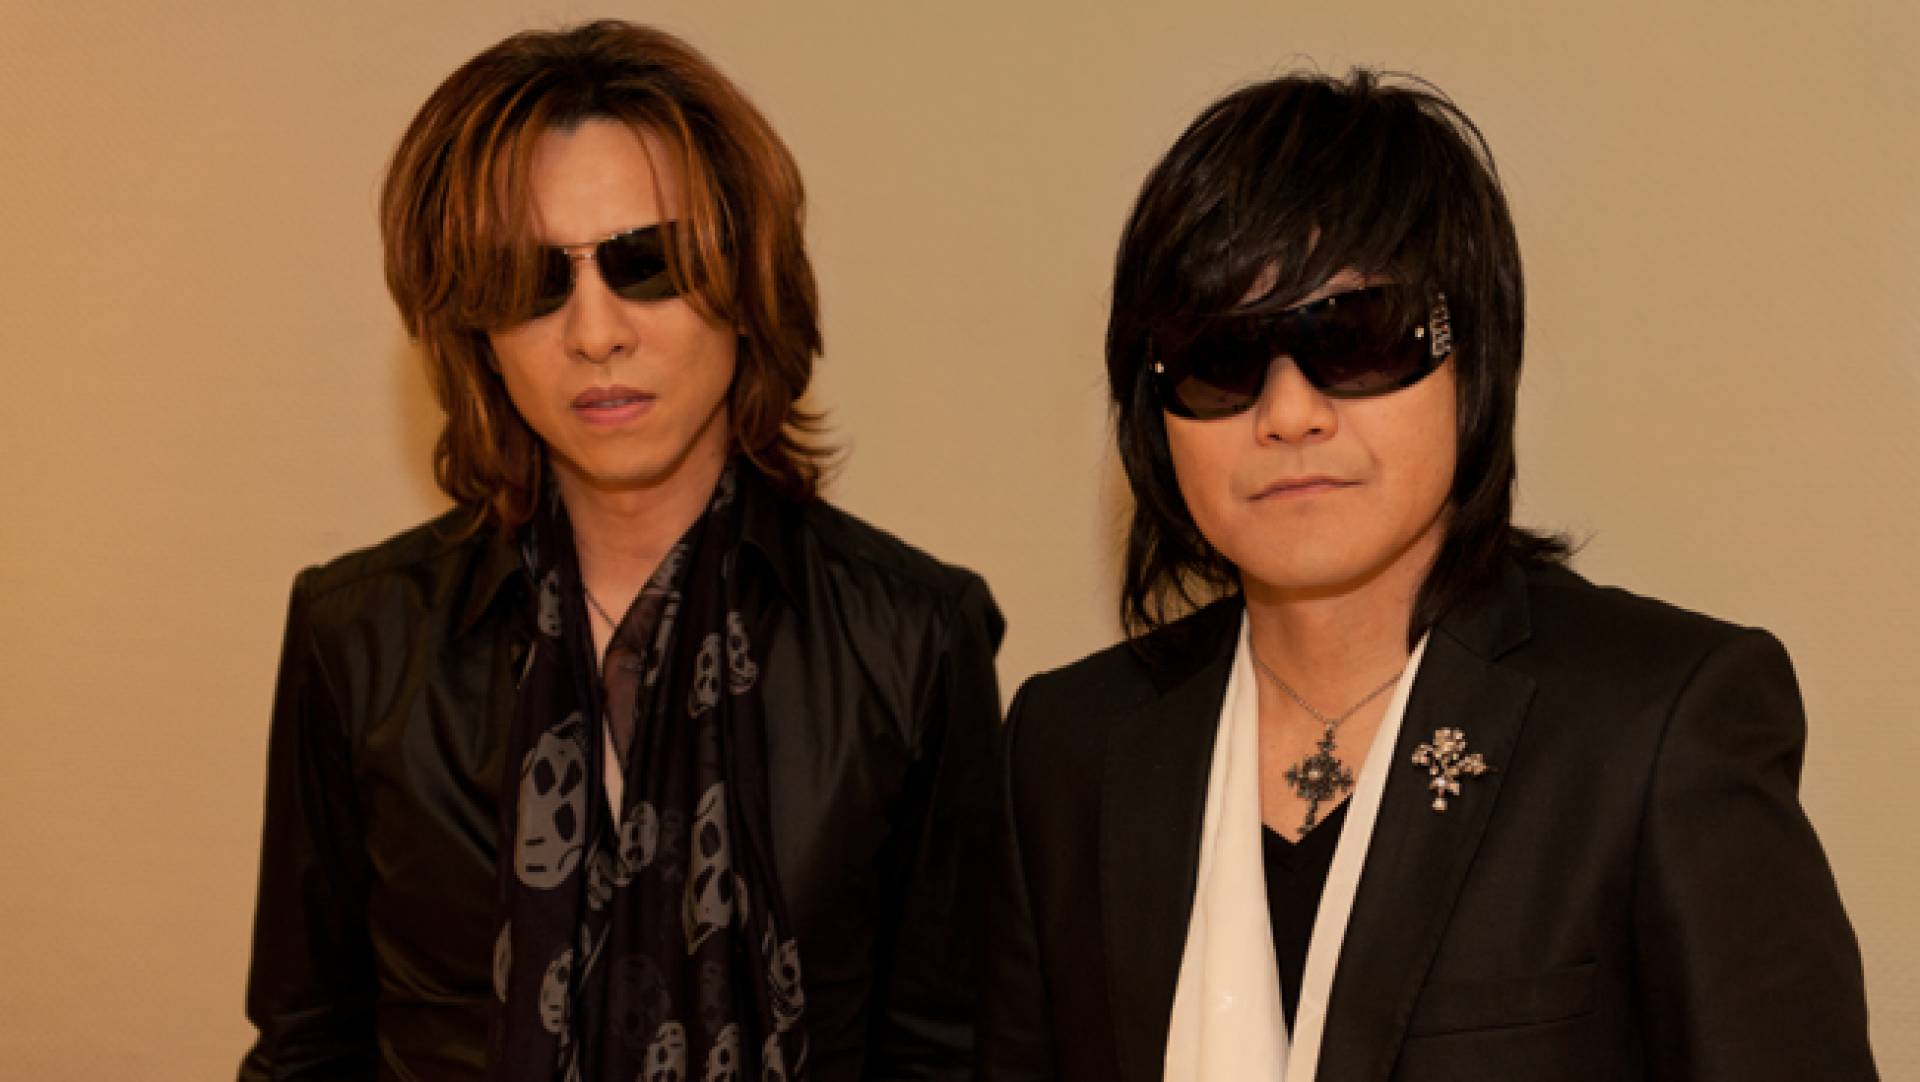 Press Conference With YOSHIKI And ToshI